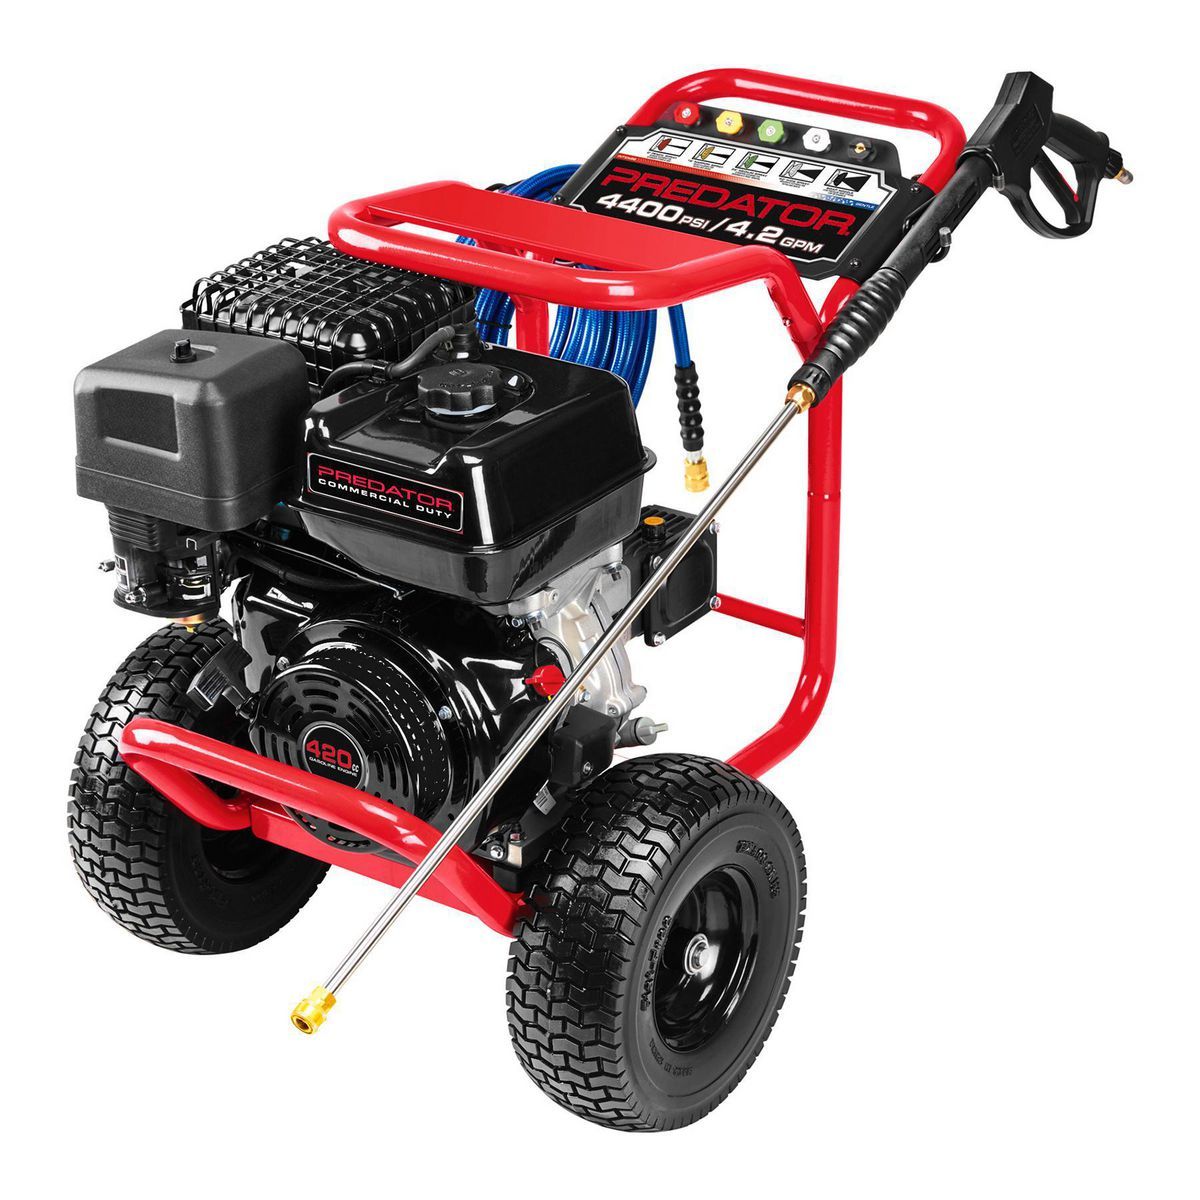 4400 PSI, 4.2 GPM, 13 HP (420cc) Commercial-Duty Pressure Washer EPA